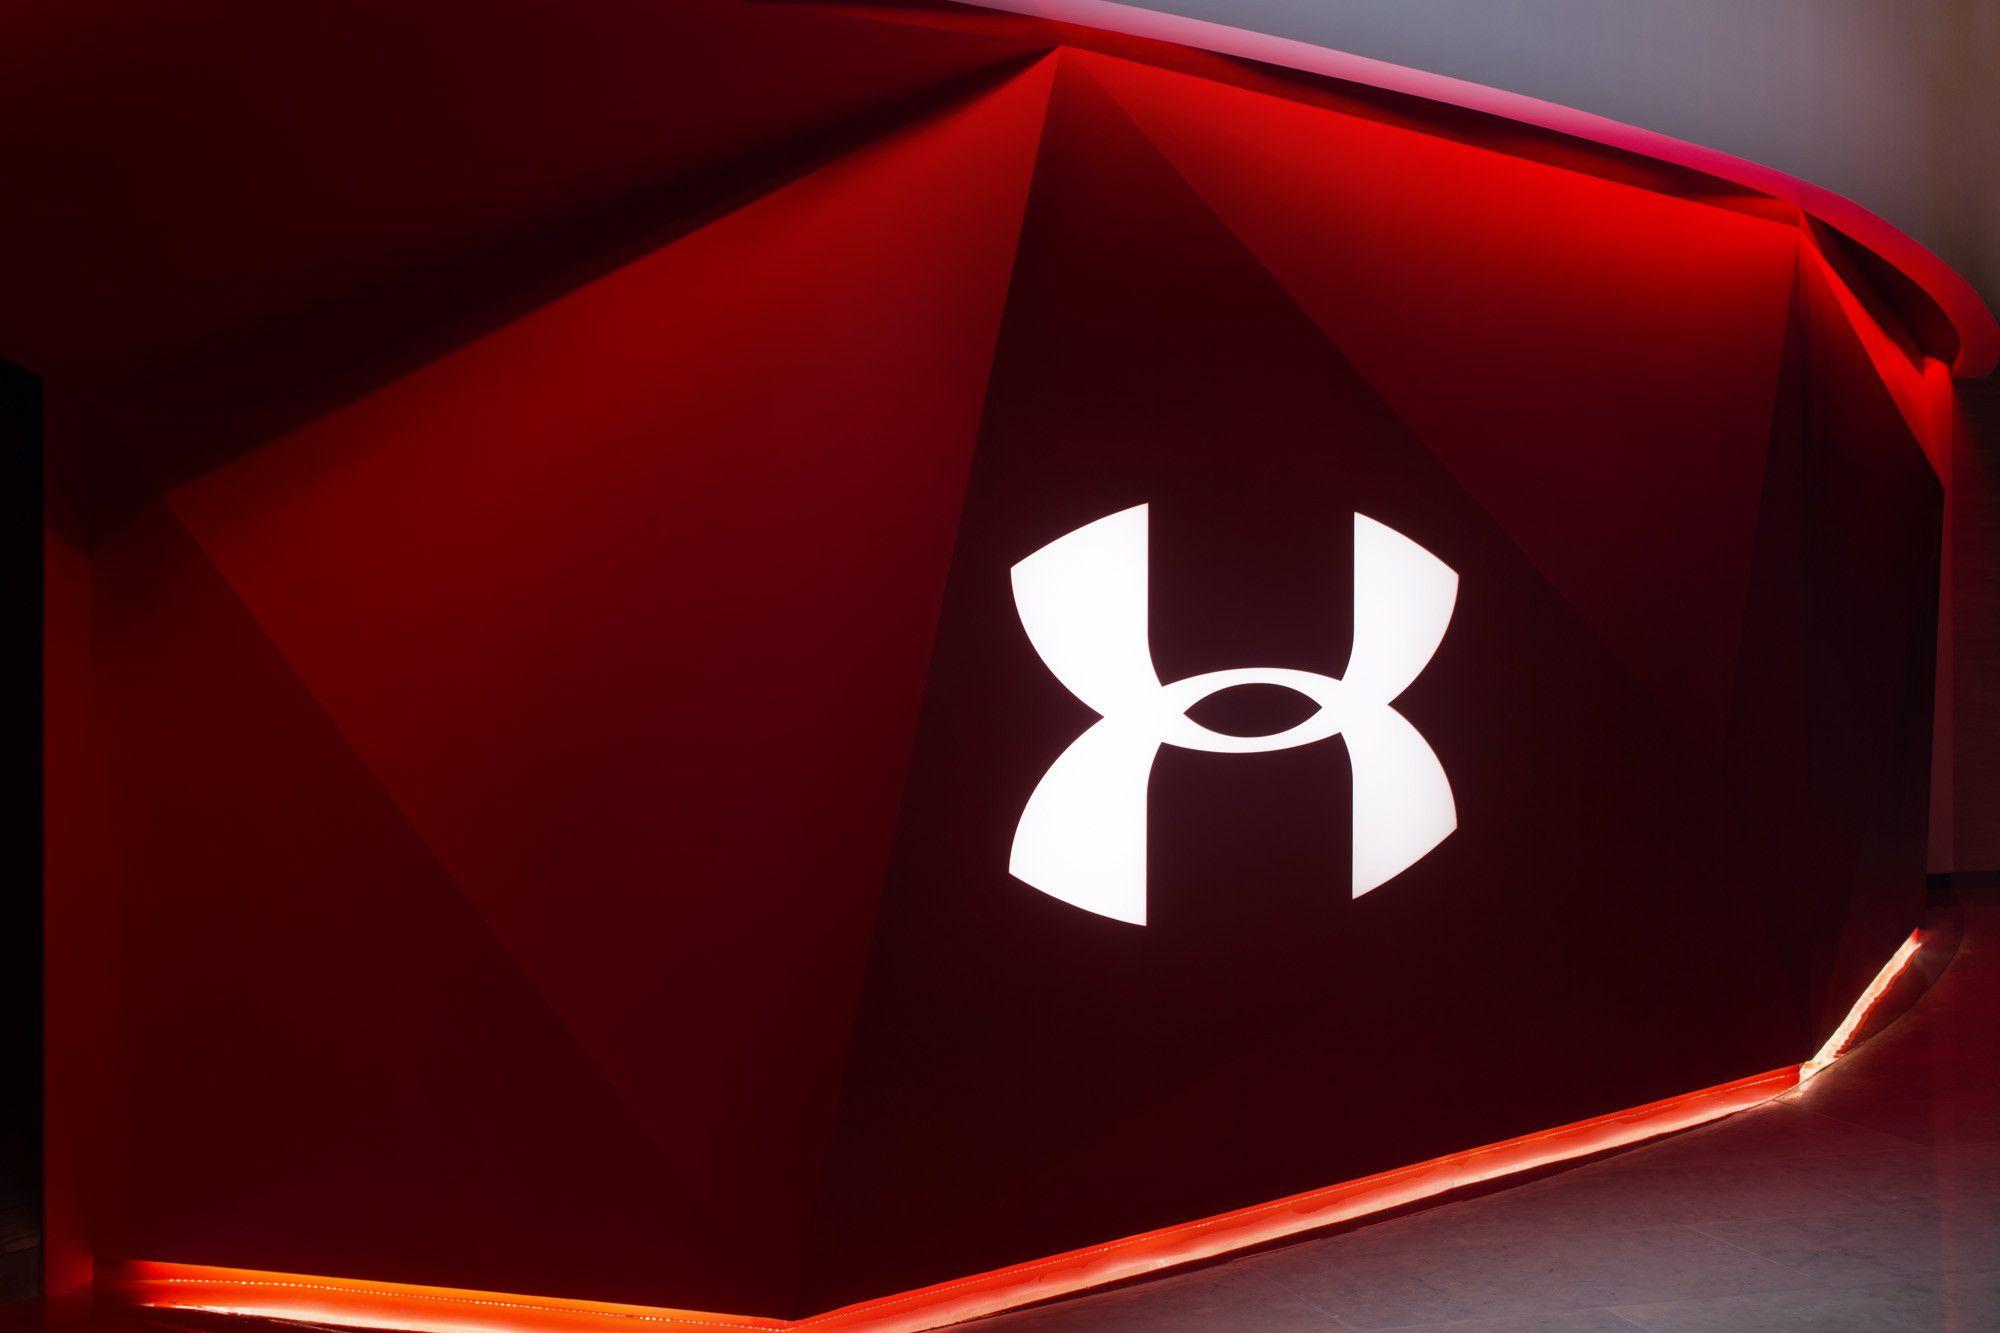 Galleries of Under Armour Logo - Gallery of Under Armour / Marc Thorpe Design - 2